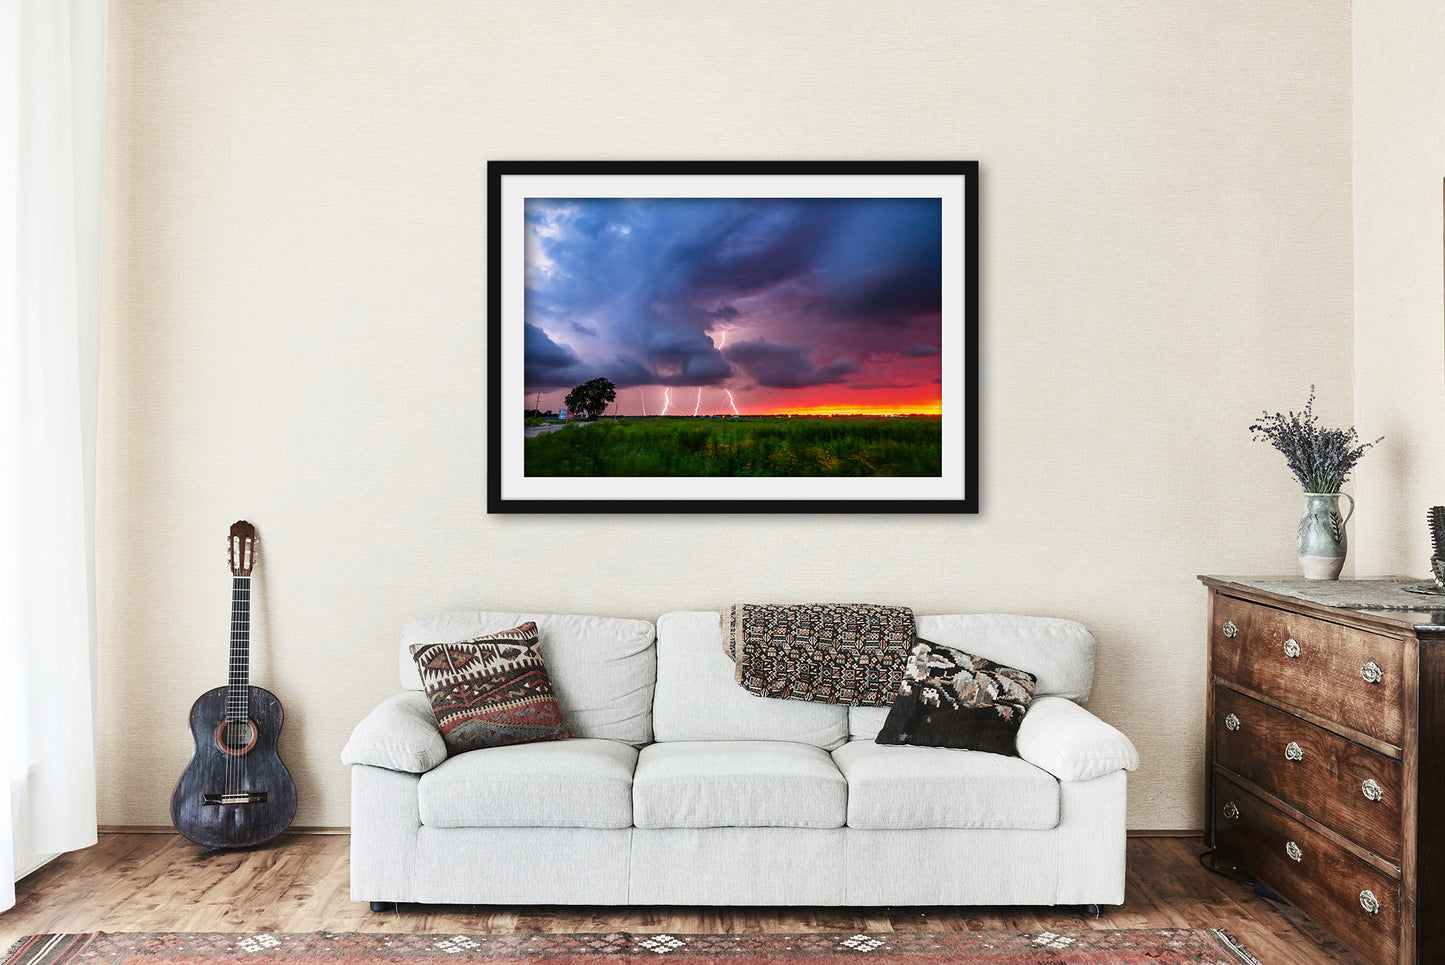 Framed and Matted Print - Picture of Multiple Lightning Strikes at Sunset on Stormy Evening in Oklahoma - Storm Wall Art Thunderstorm Decor